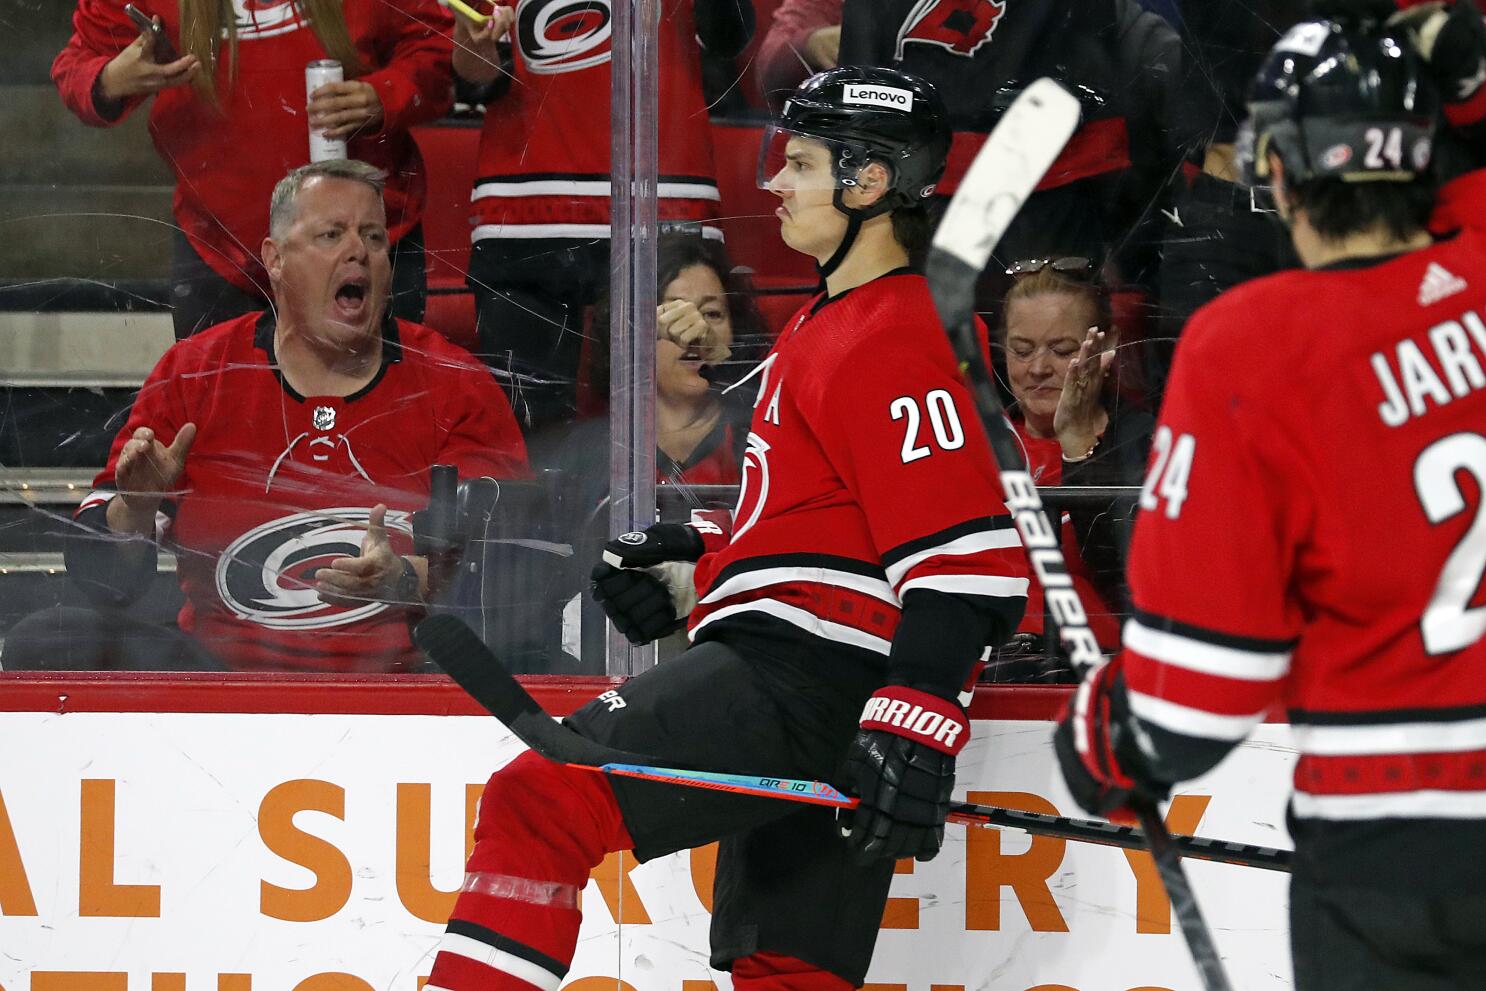 Jeff Skinner Looking For Big Raise After Strong Start